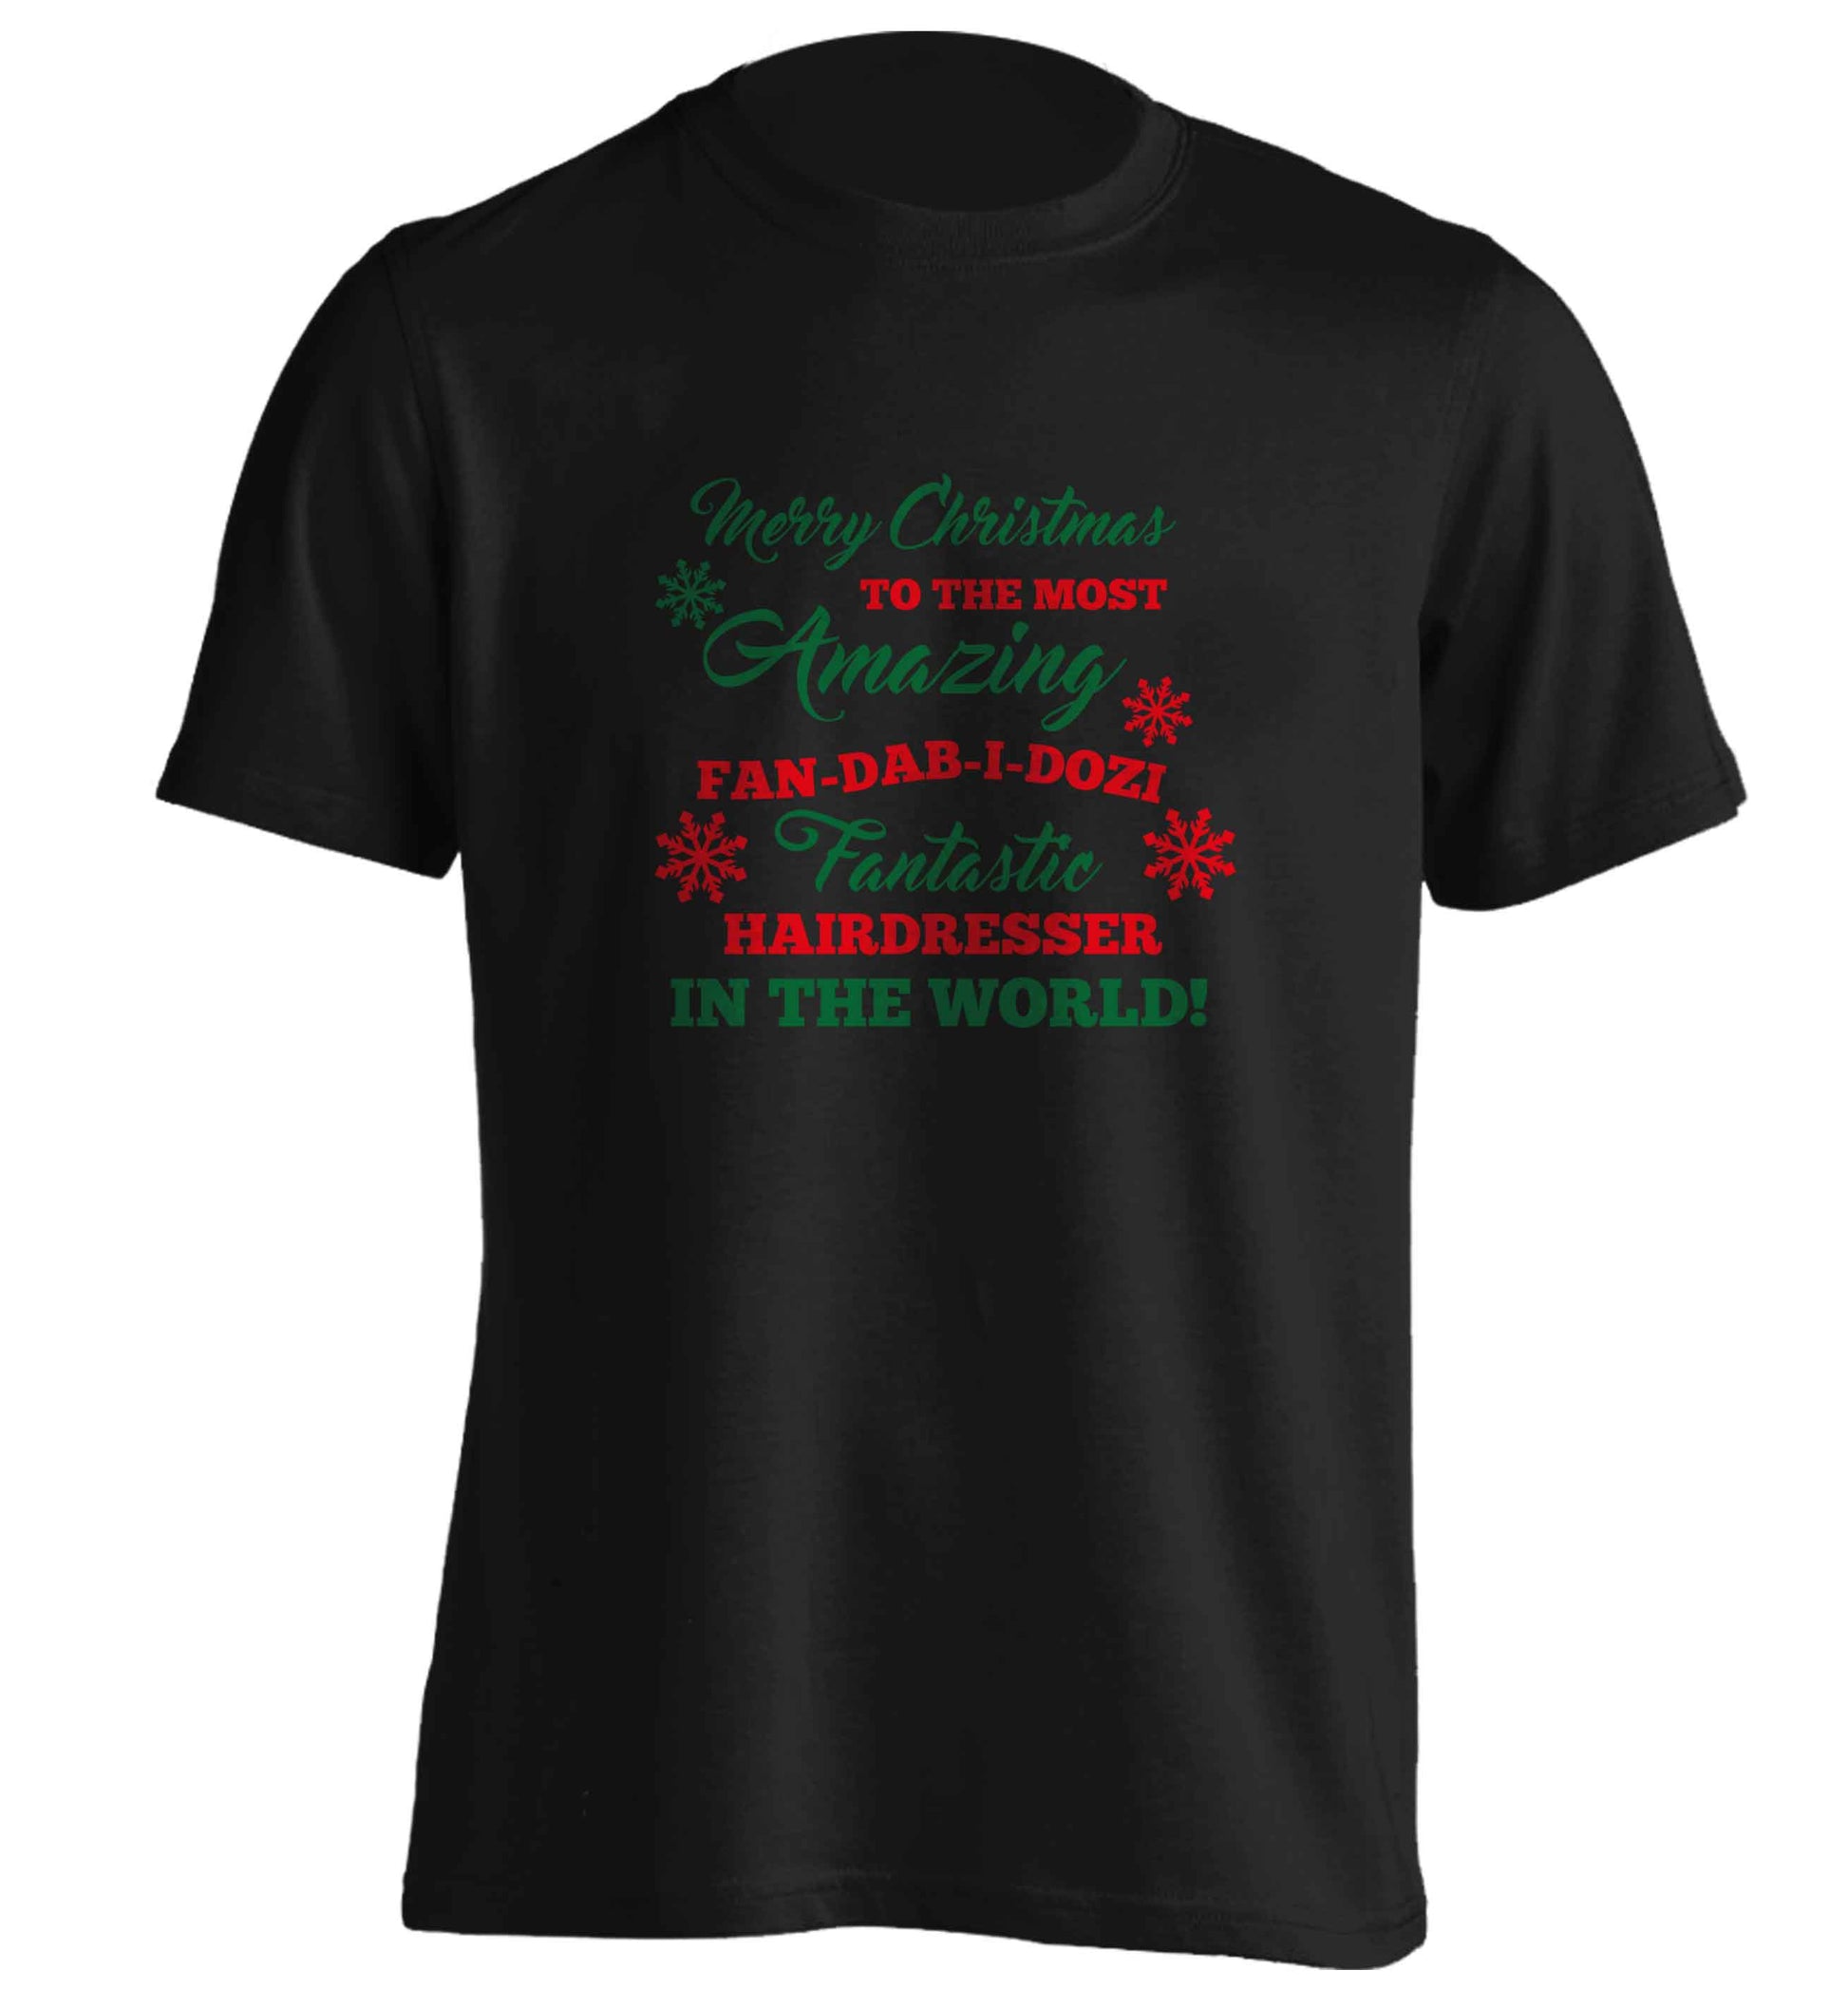 Merry Christmas to the most amazing dental assistant in the world! adults unisex black Tshirt 2XL